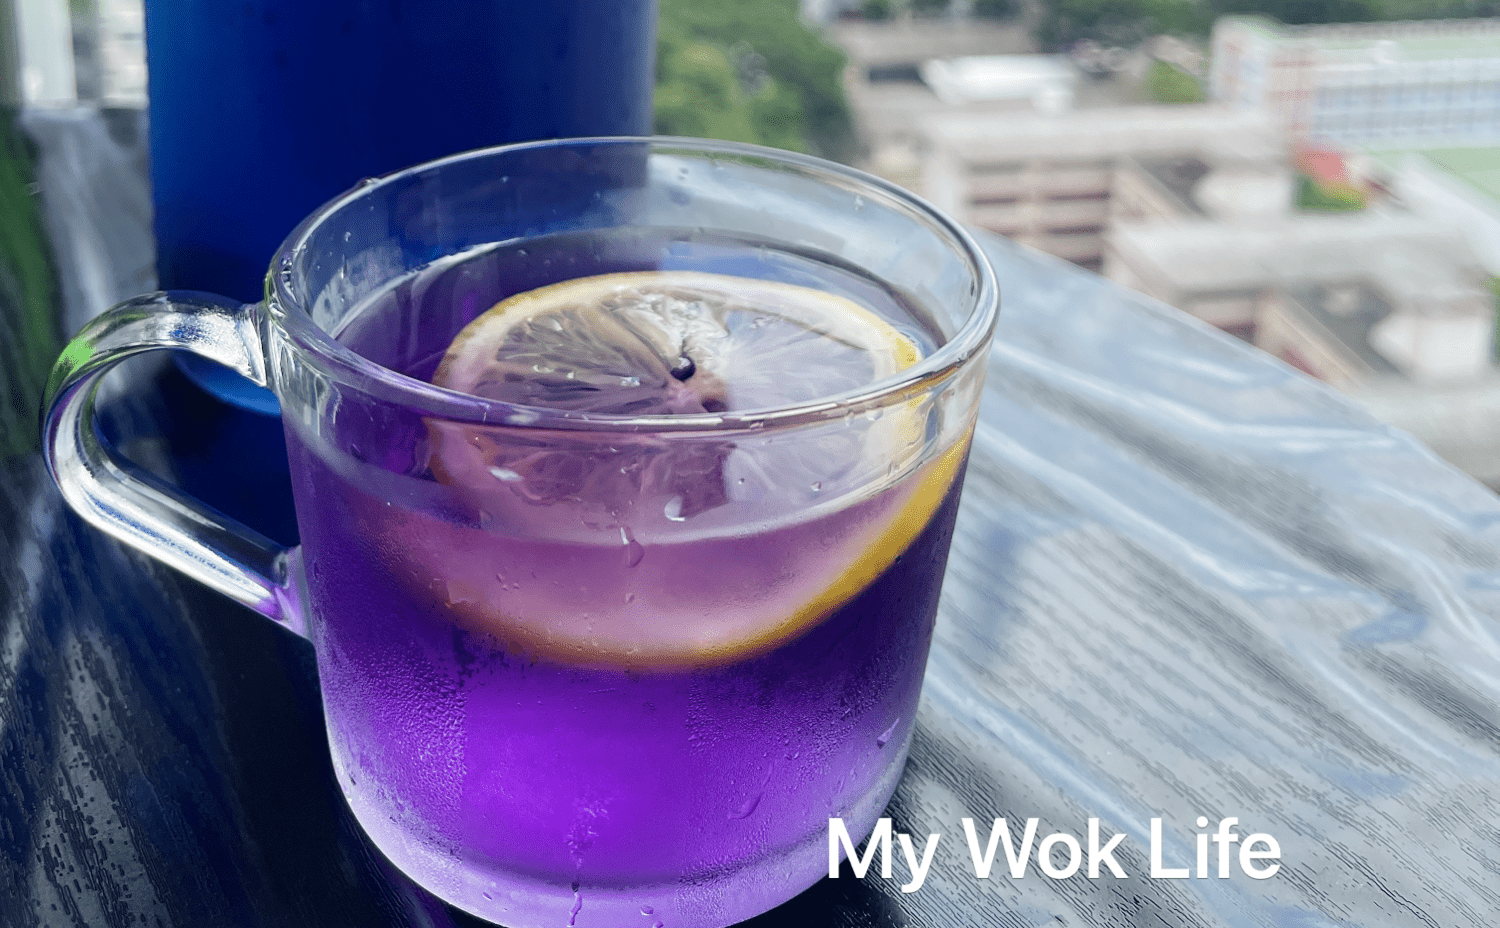 My Wok Life Cooking Blog - Cold Brew Butterfly Pea Tea (Great Blue Pea Water) 冷泡蝶豆花茶  -